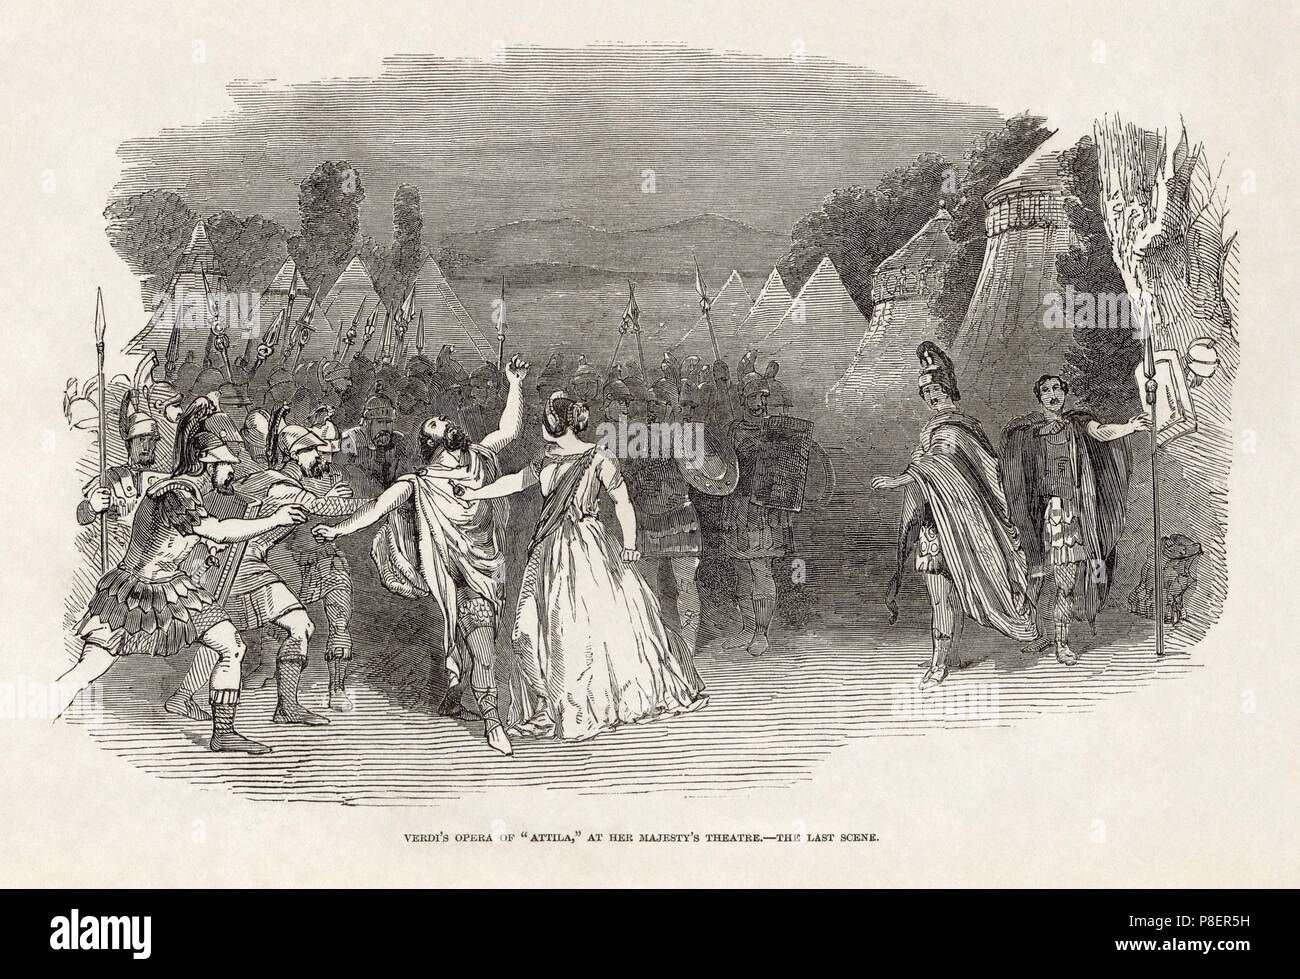 Opera Attila by Giuseppe Verdi at Her Majesty's Theatre, London. From The Illustrated London News of April 15, 1848. Museum: PRIVATE COLLECTION. Stock Photo